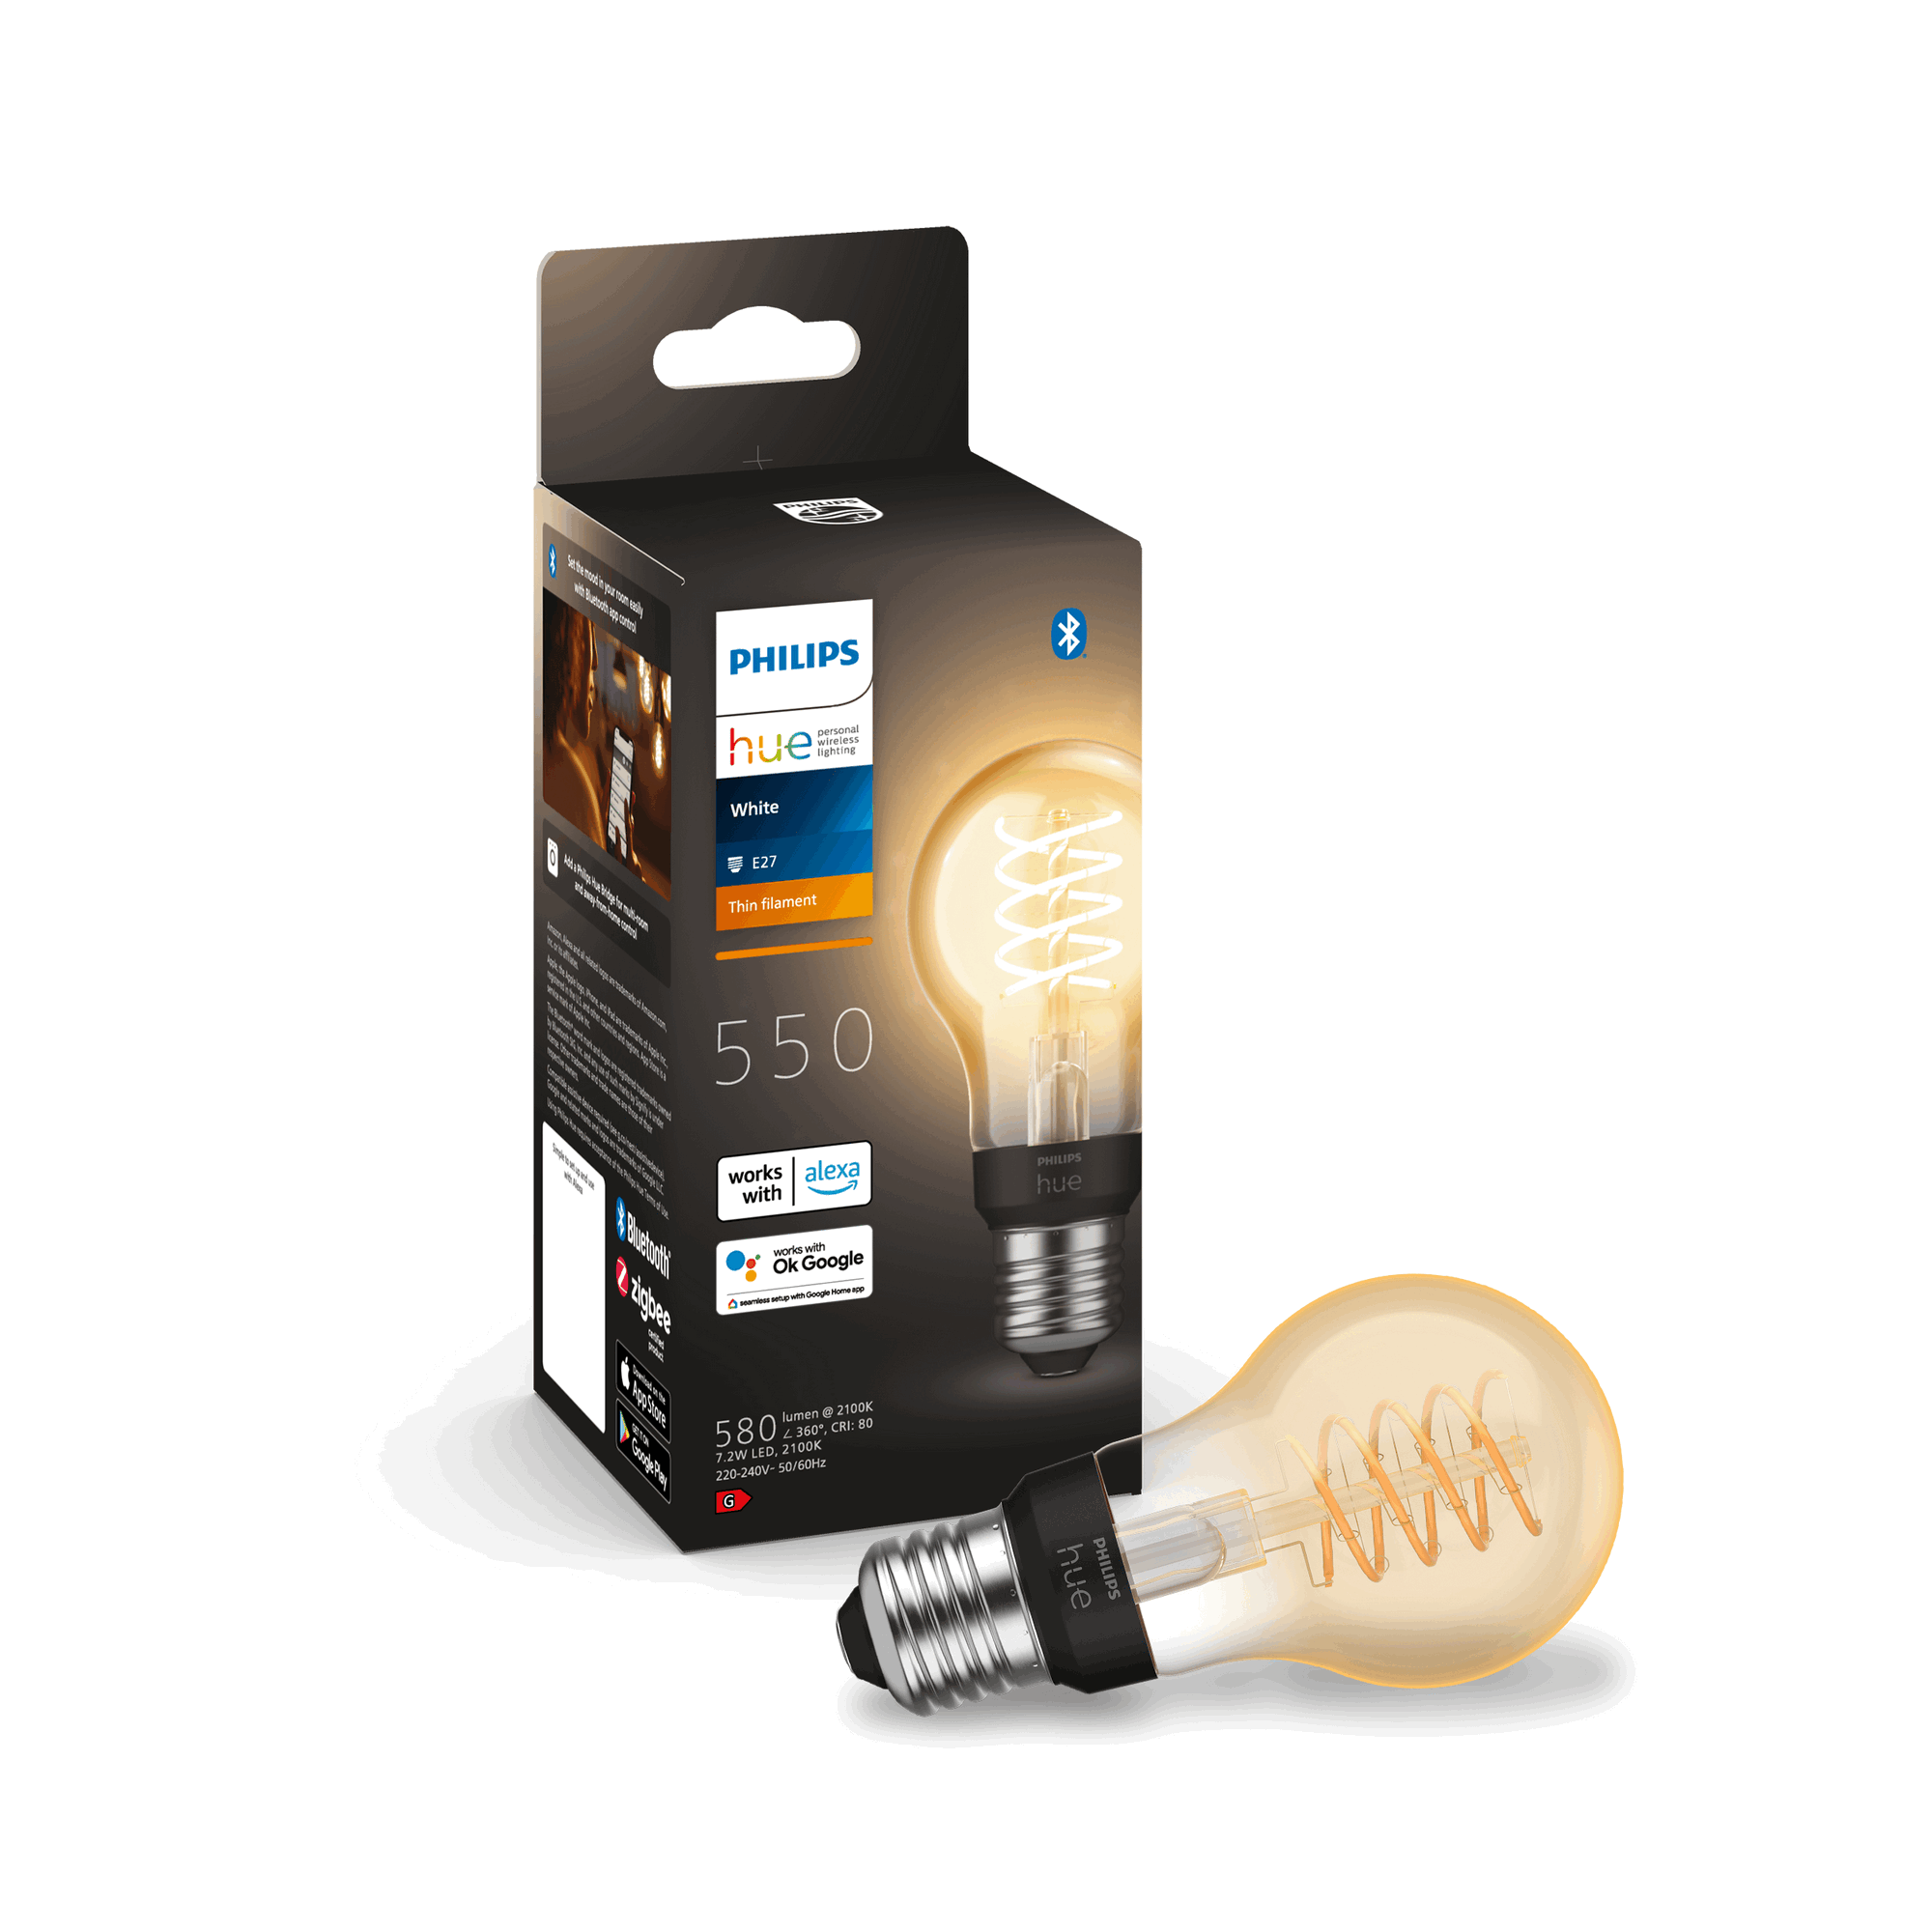 LED-Filament-Lampe 'Philips Hue White Fil A60' E27 7 W 550 lm + product picture